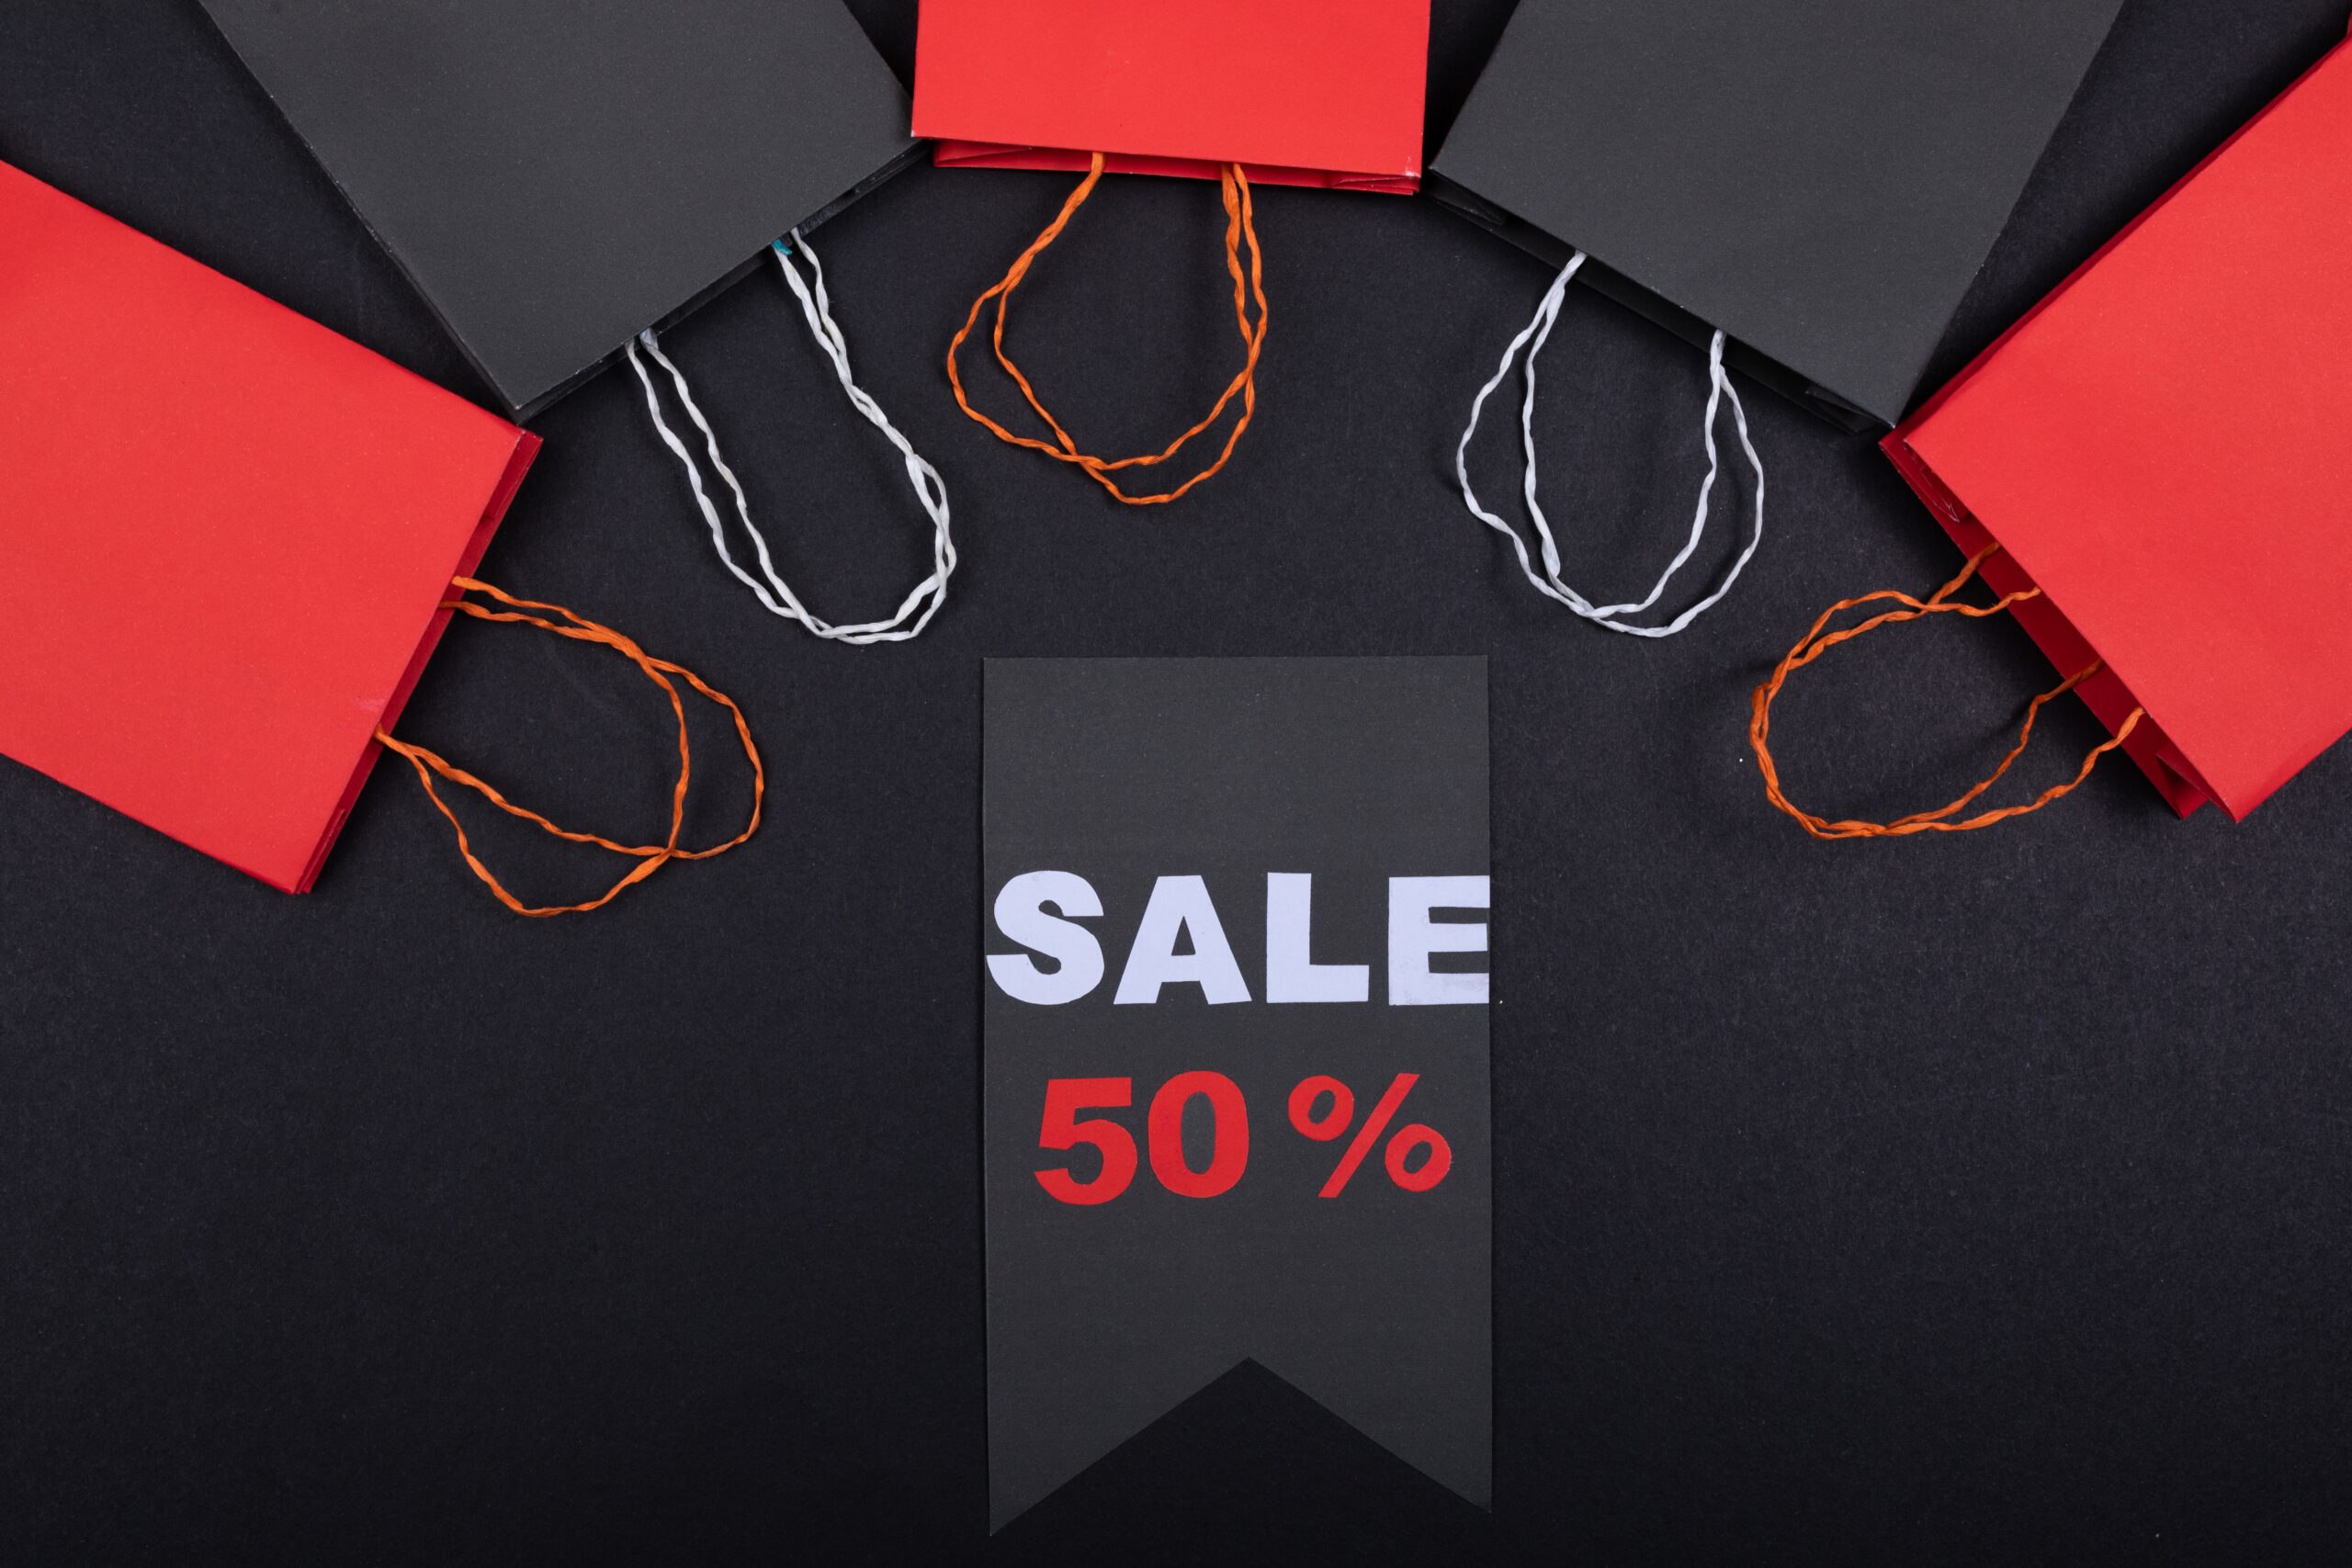 Save Big: Insider Tips for Buying Products at 50% Off